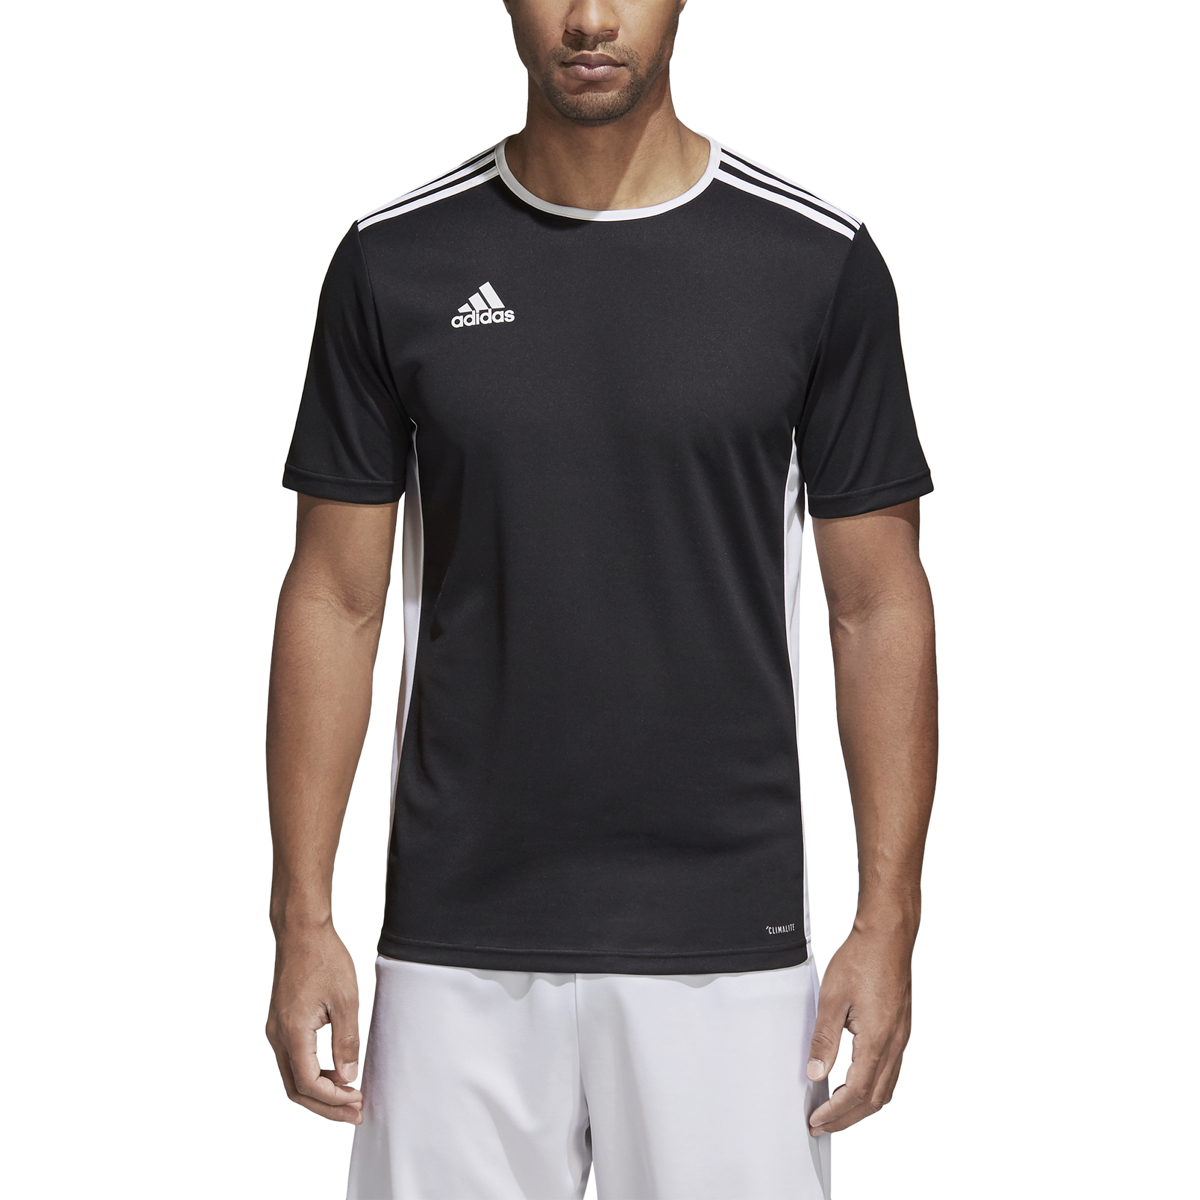 Adidas Men's Soccer Entrada 18 Jersey Adidas - Ships Directly From Adidas - image 1 of 6